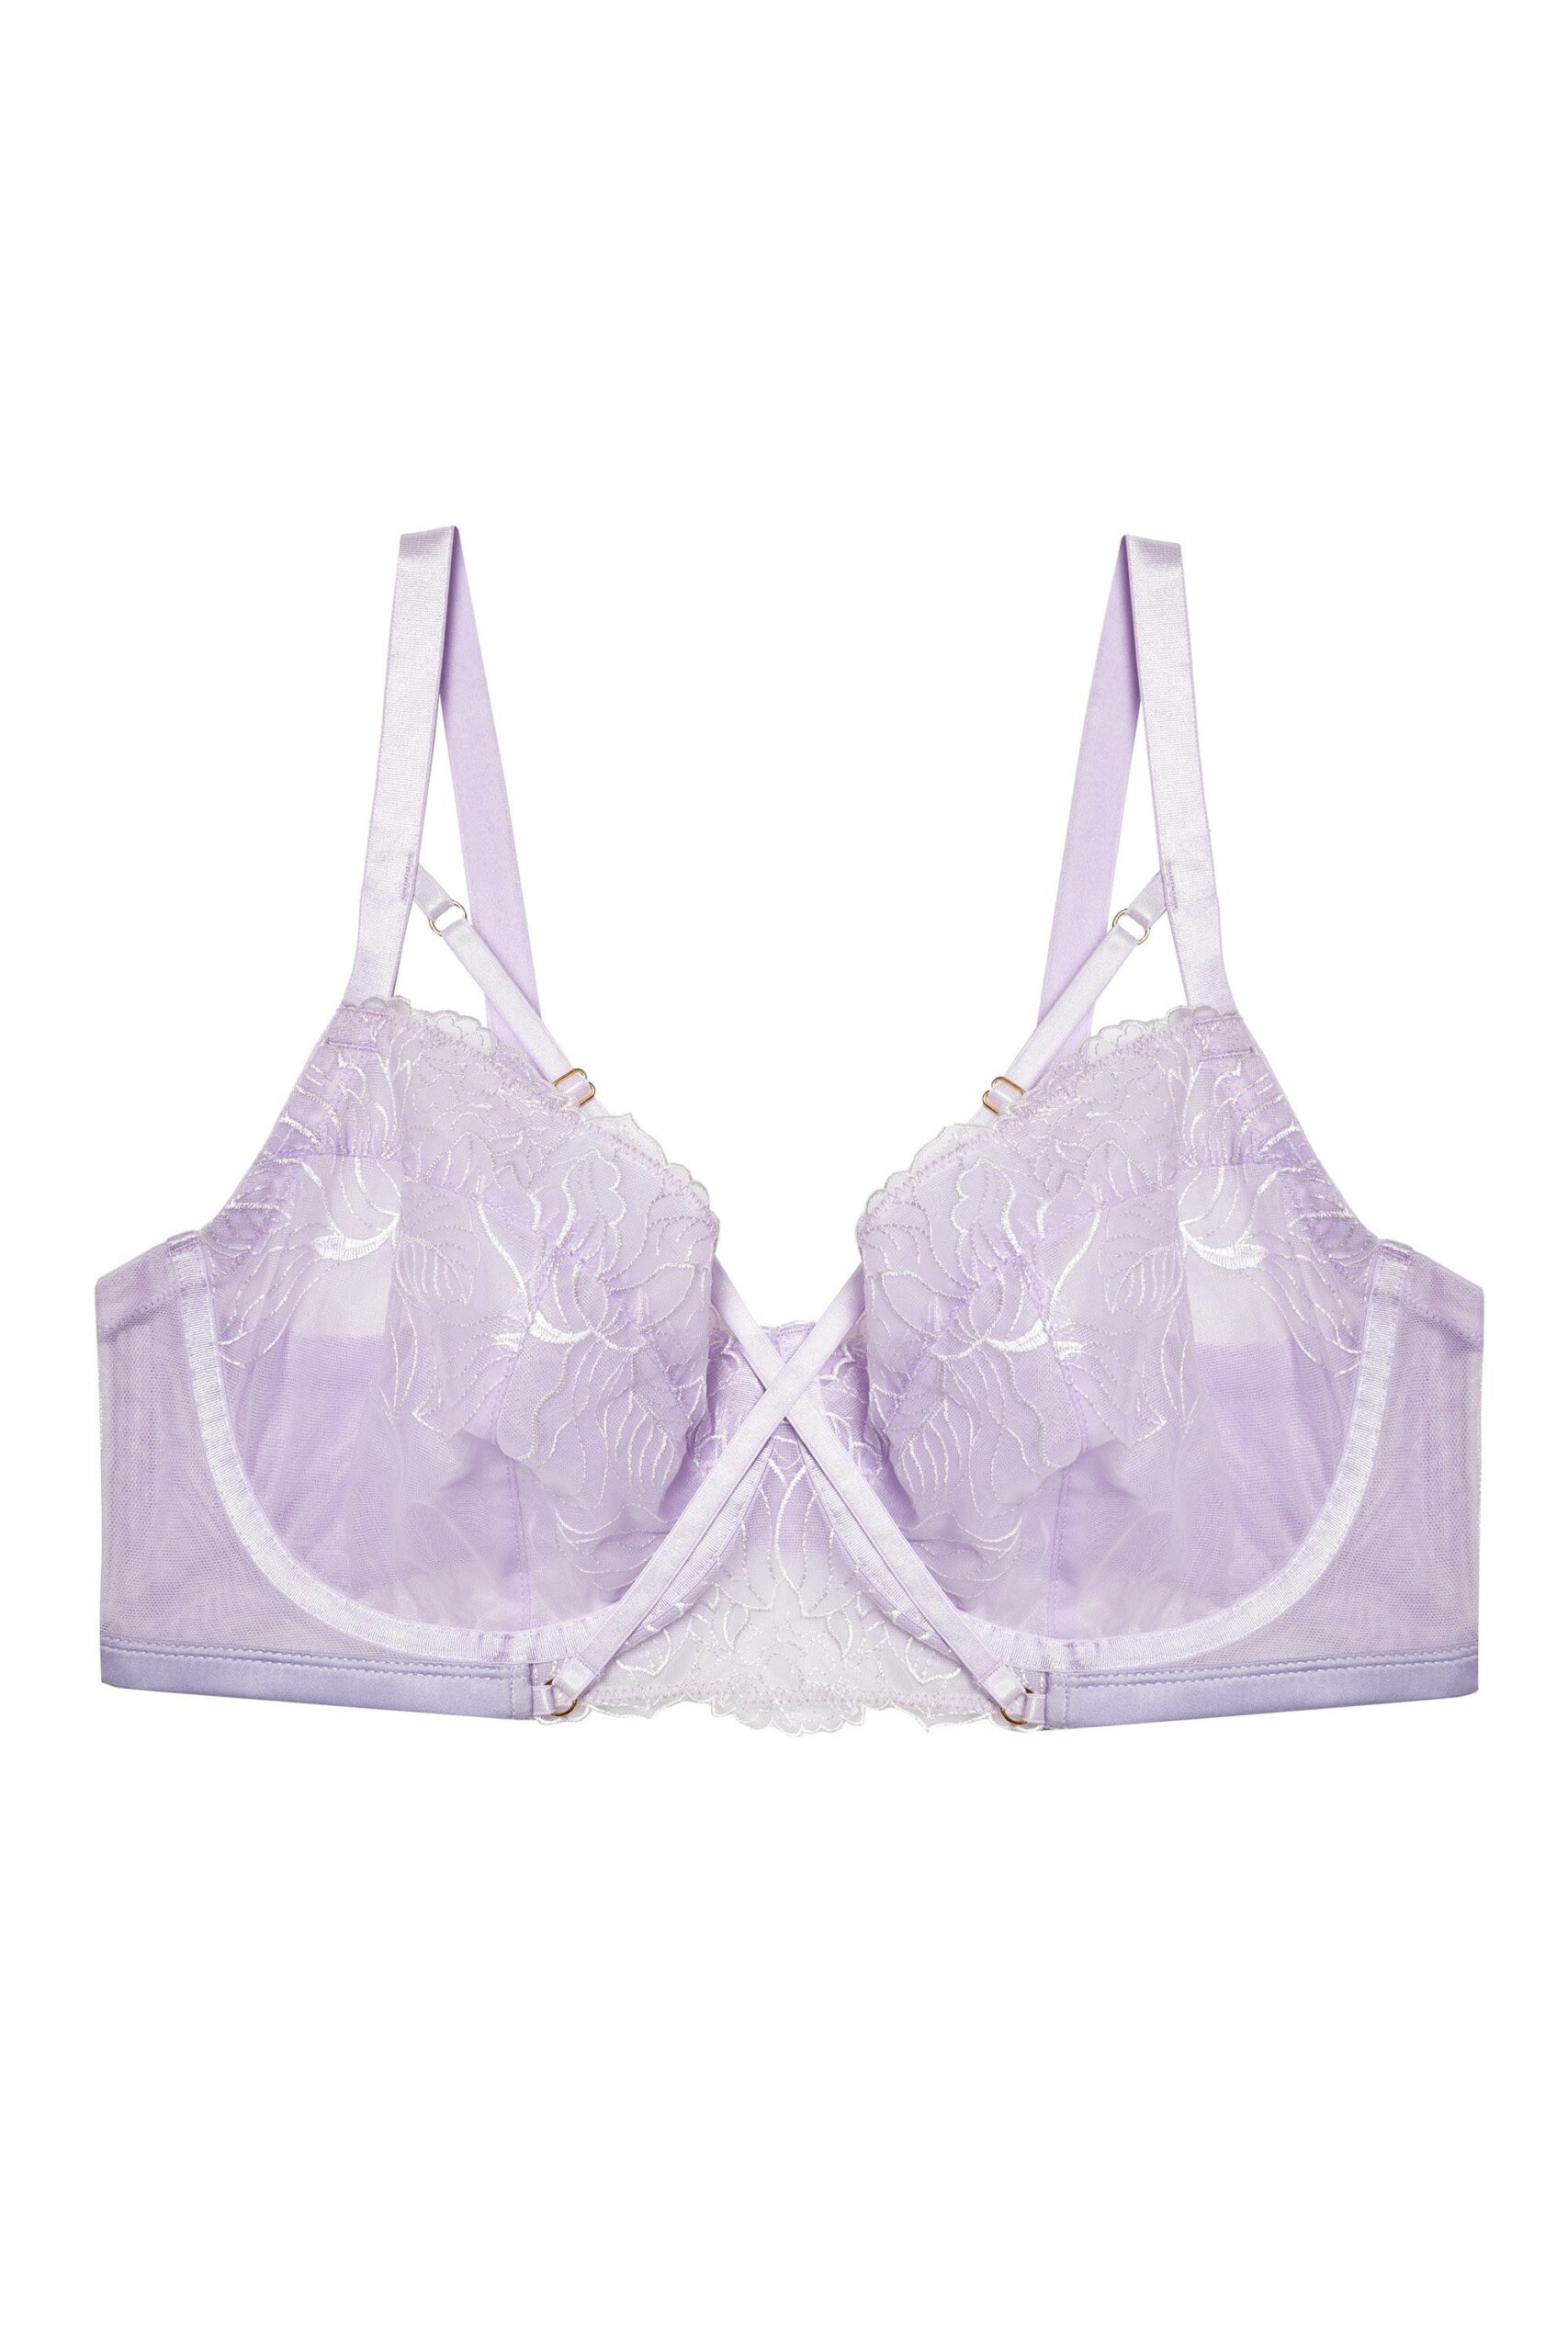 Only 29.40 usd for Mila Lilac Lace Bra Online at the Shop